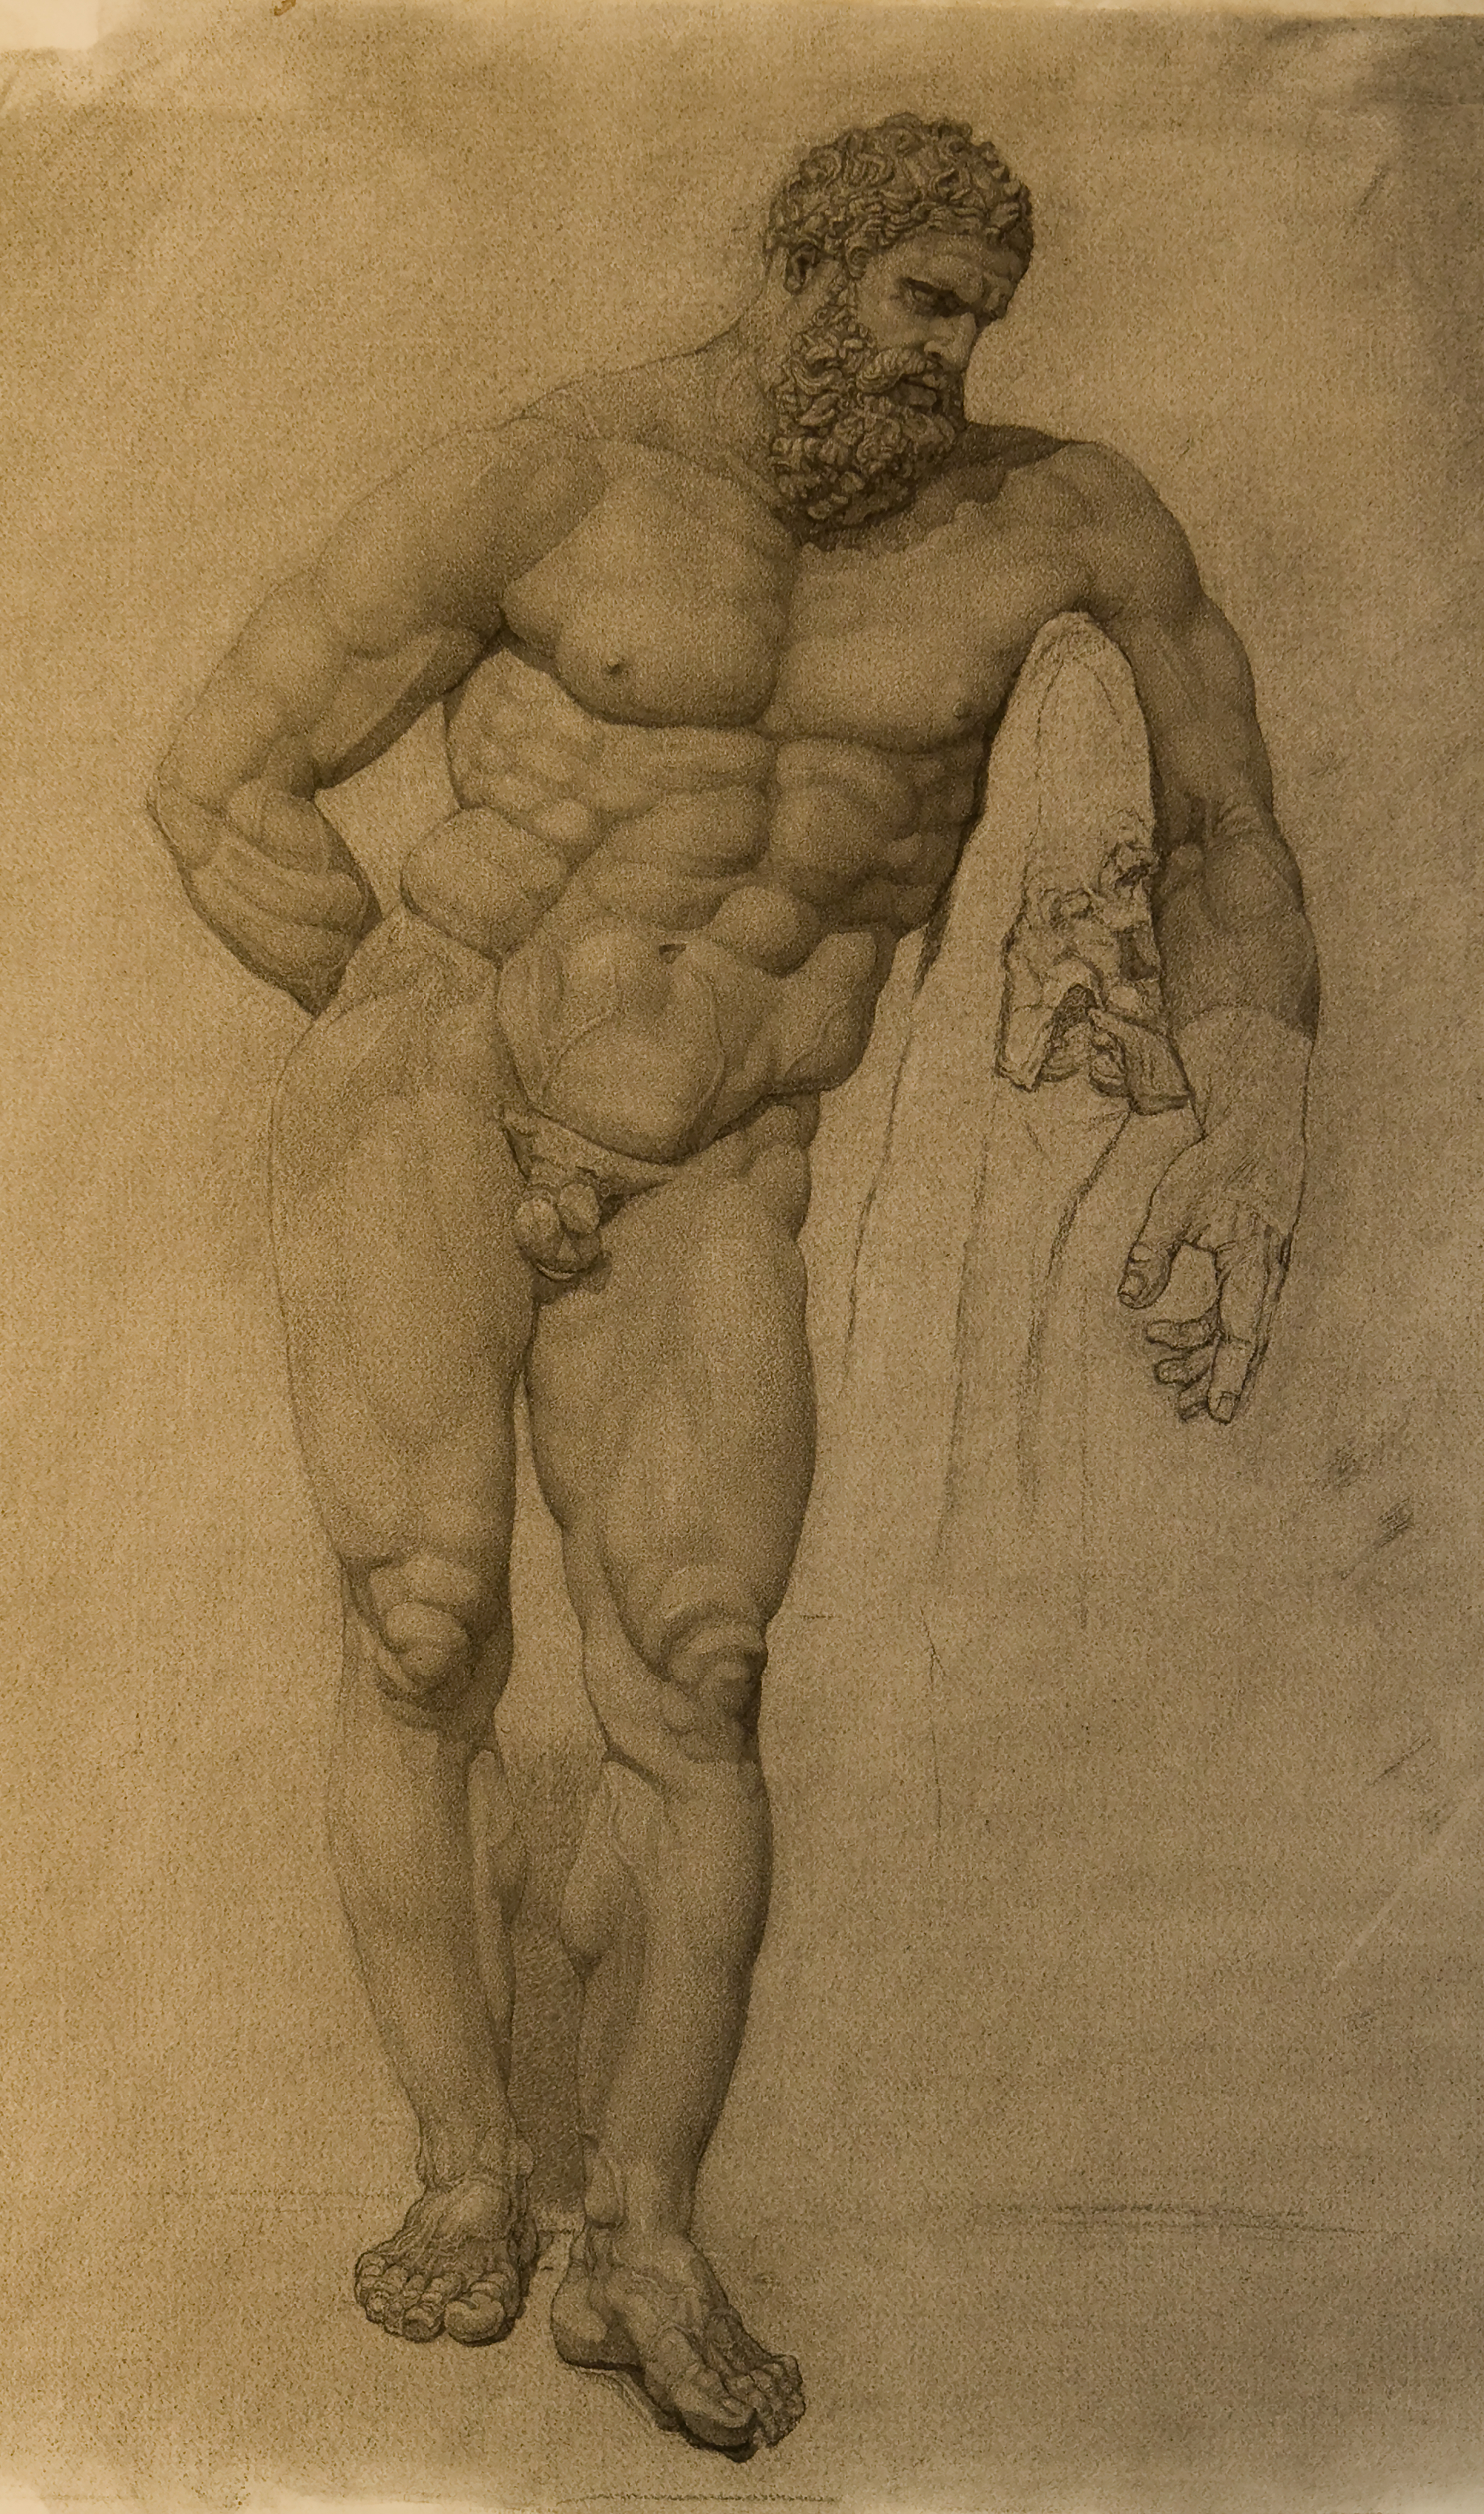 Farnese Hercules, Hellenistic sculpture in the National Archeology Museum, Naples, charcoal, by P. Brad Parker